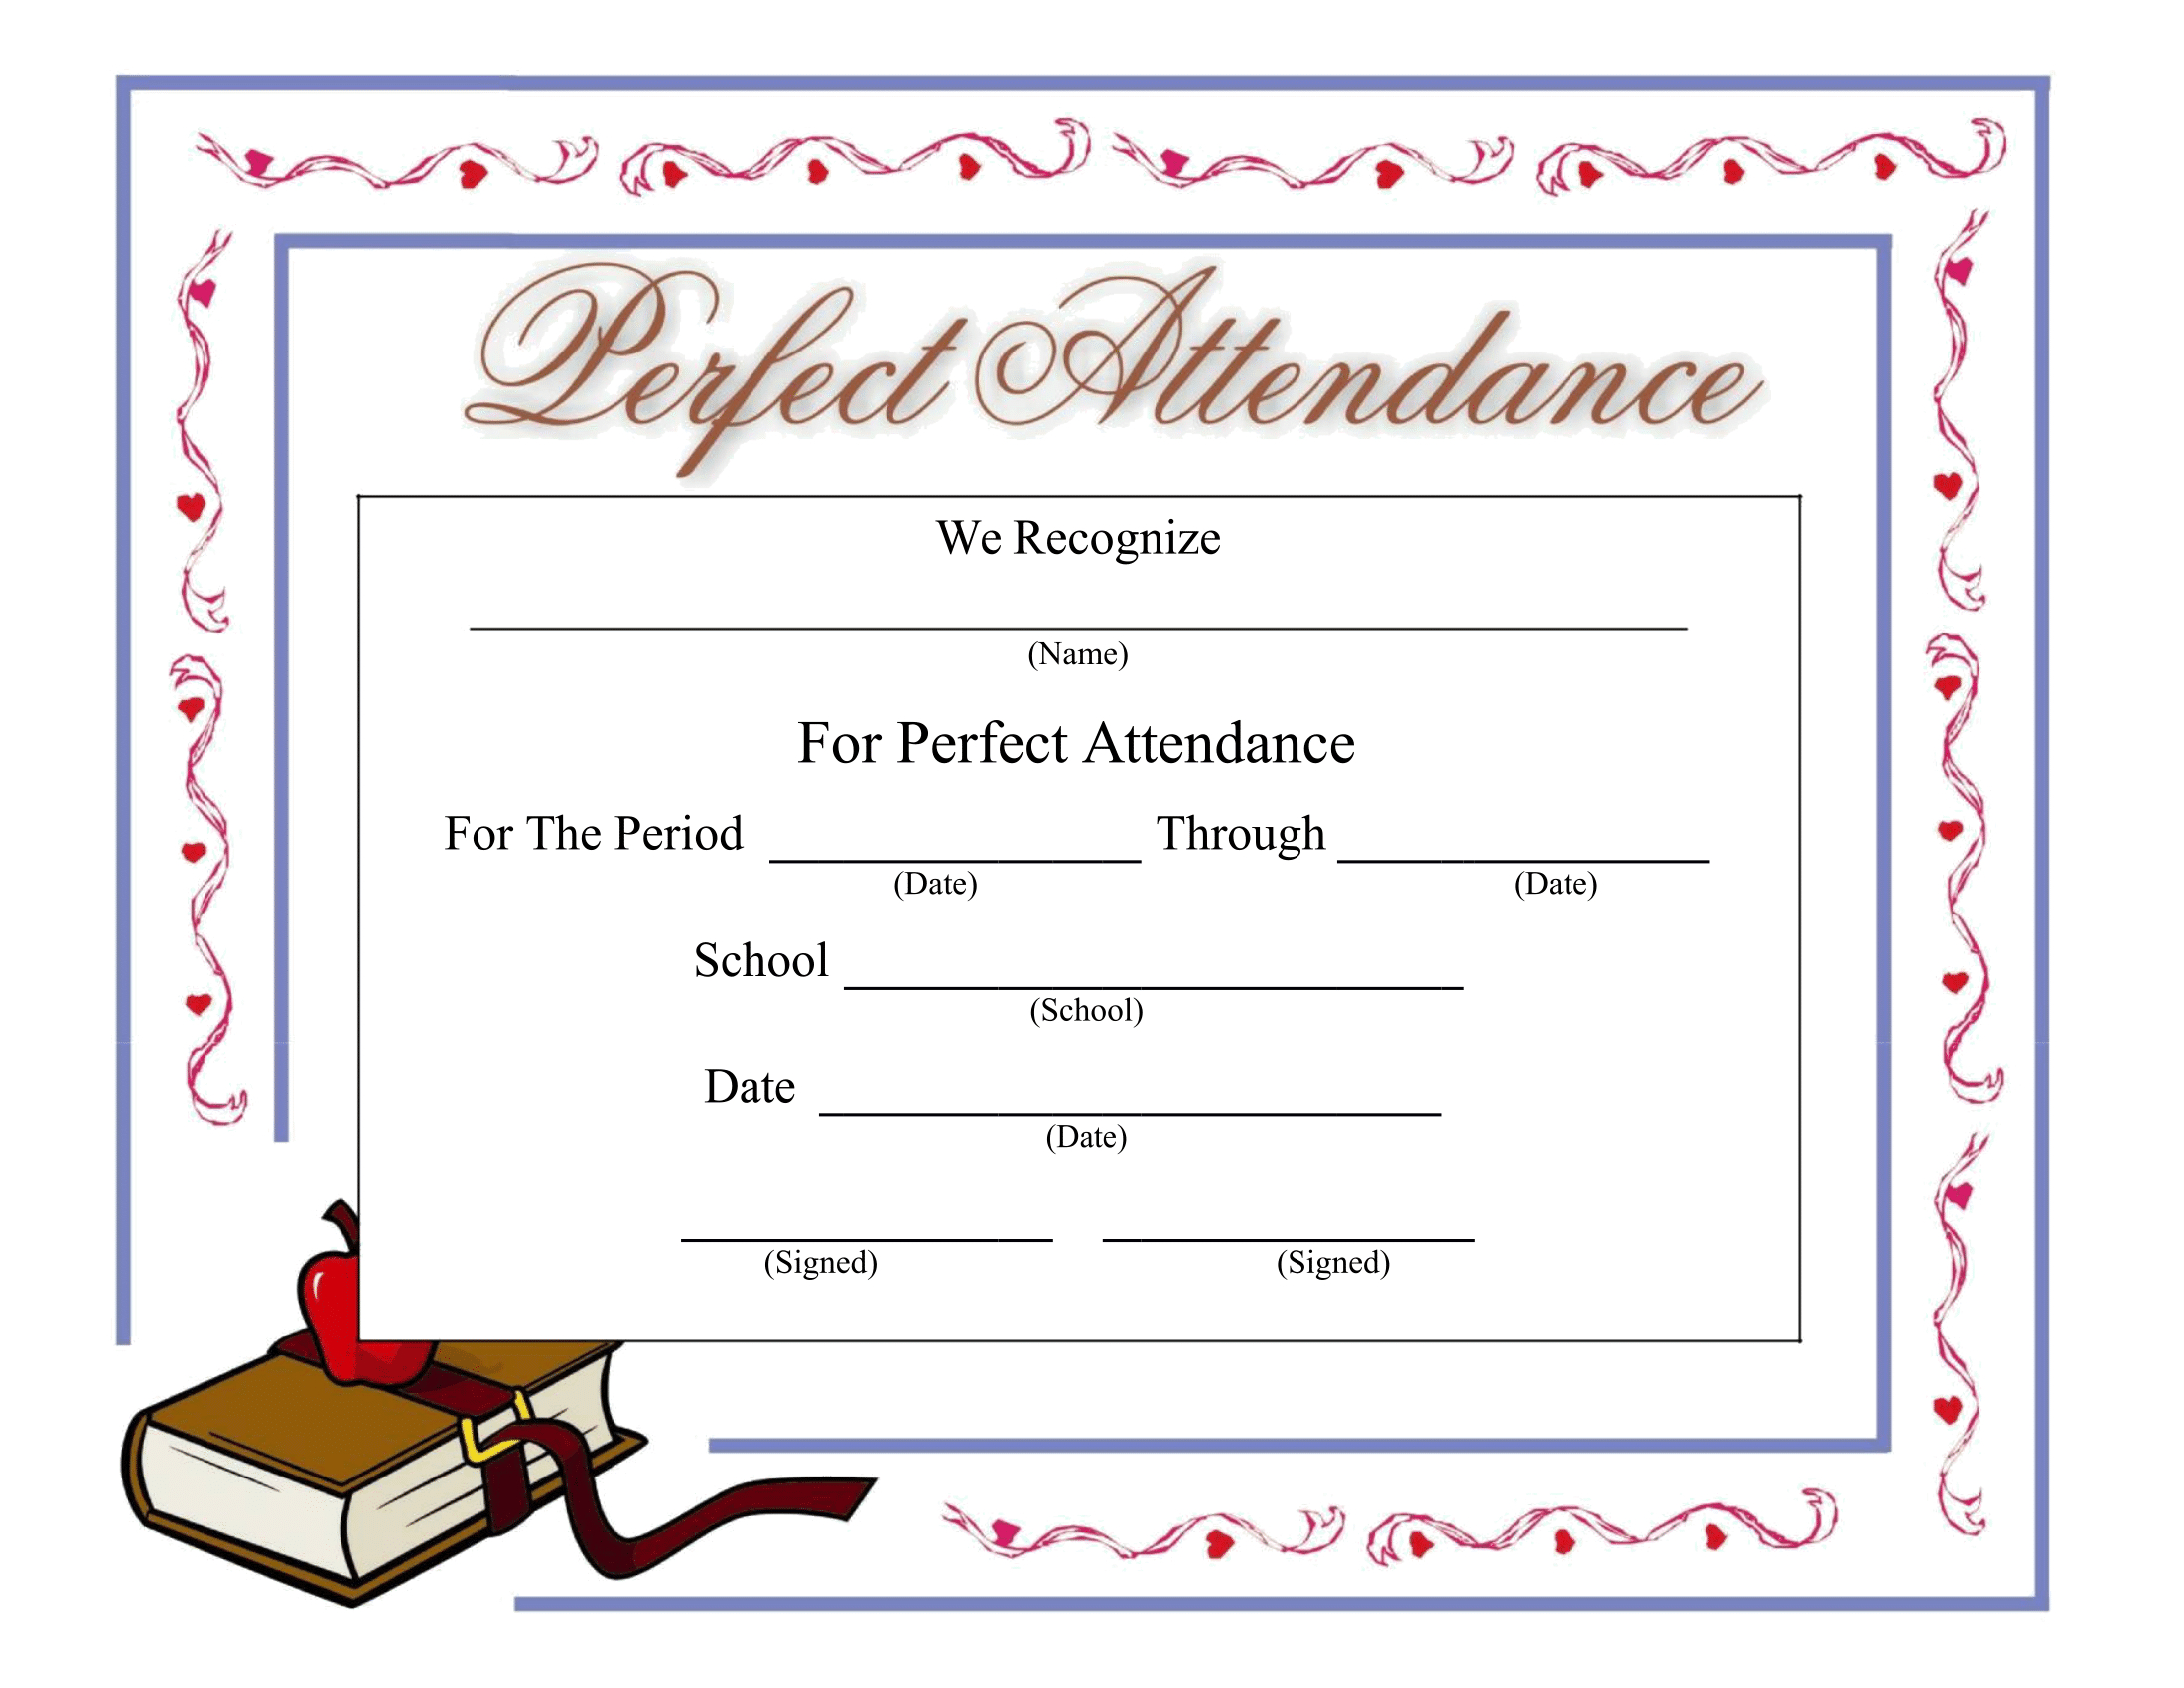 Perfect Attendance Certificate - Download A Free Template With Regard To Perfect Attendance Certificate Free Template